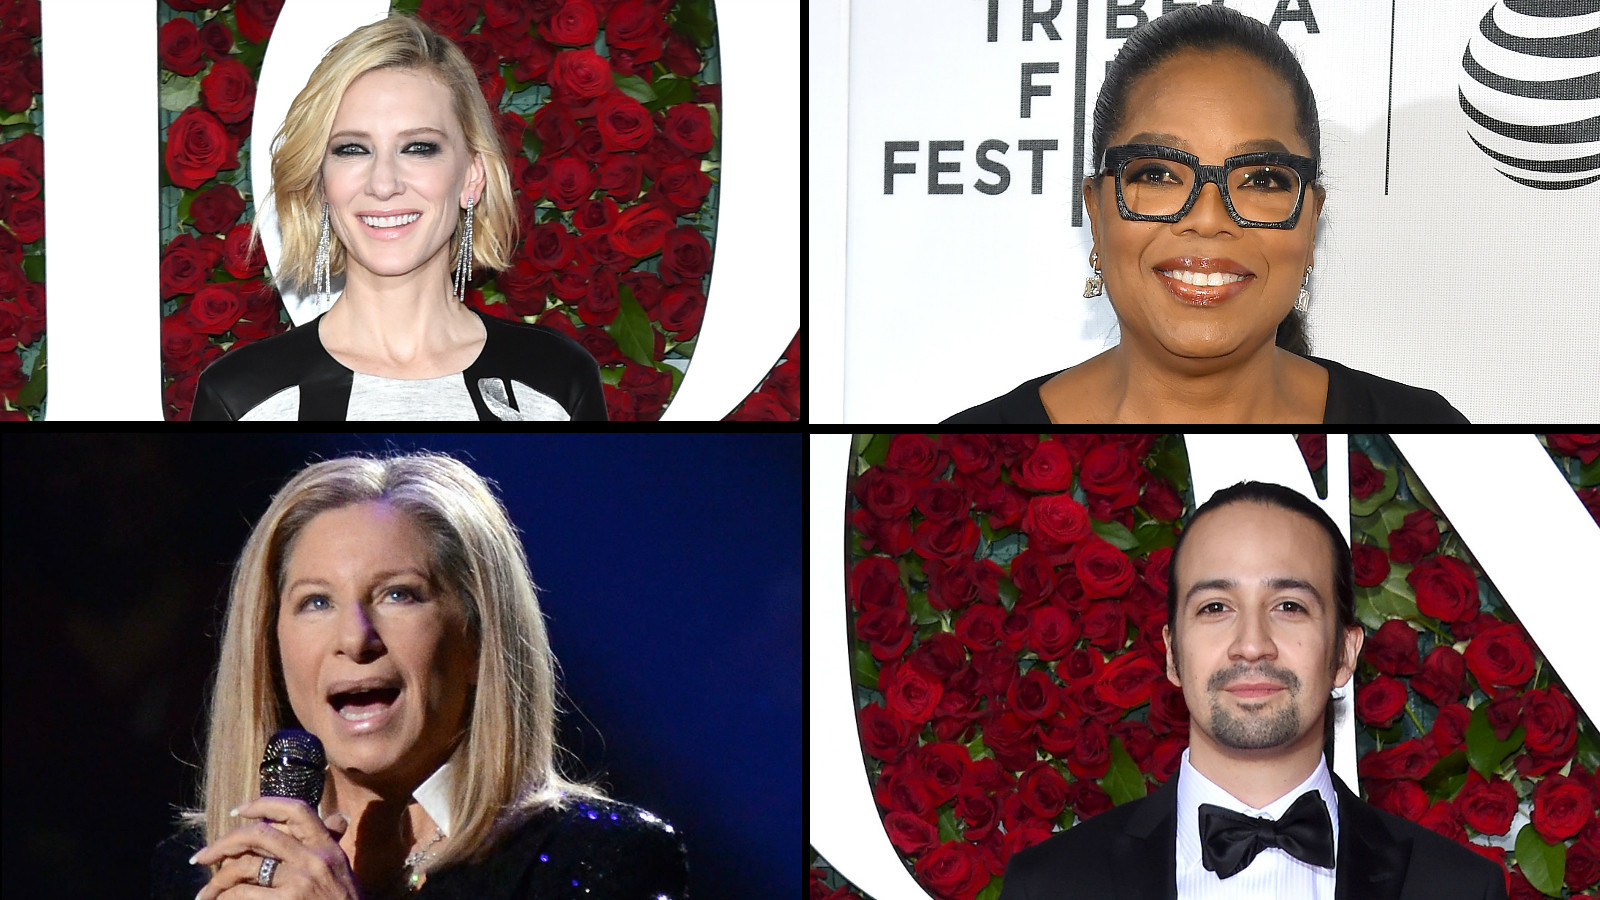 Cate Blanchett, Oprah Winfrey, Barbara Streisand and Lin-Manuel Miranda. (Charles Sykes / Invision / Associated Press, Ben Gabbe / Getty Images, Evan Agostini / Invision / Associated Press, Dimitrios Kambouris / Getty Images for Tony Awards Productions)